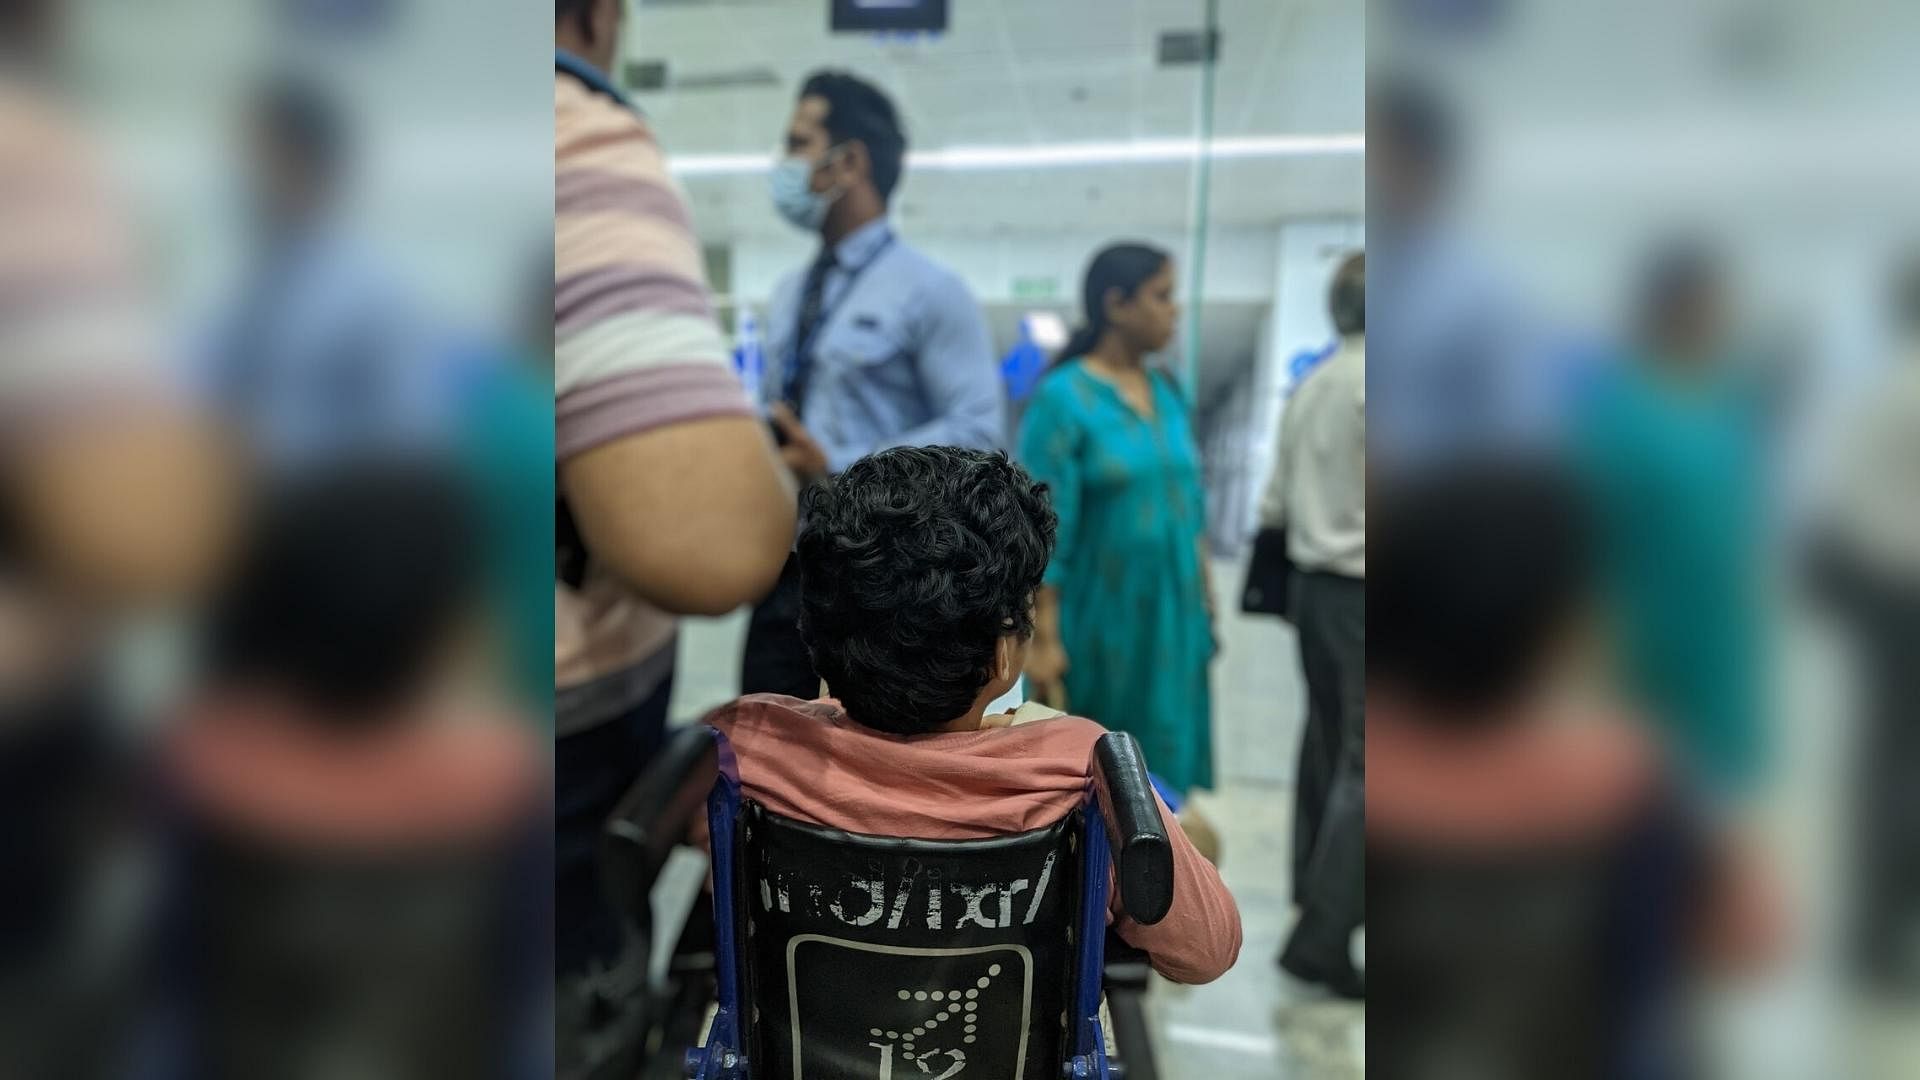 Screenshot of backview of child sitting on Indigo6E wheelchair. Ranchi Airport Indigo staff can be seen on the background surrounded by copassengers trying to reason with him.